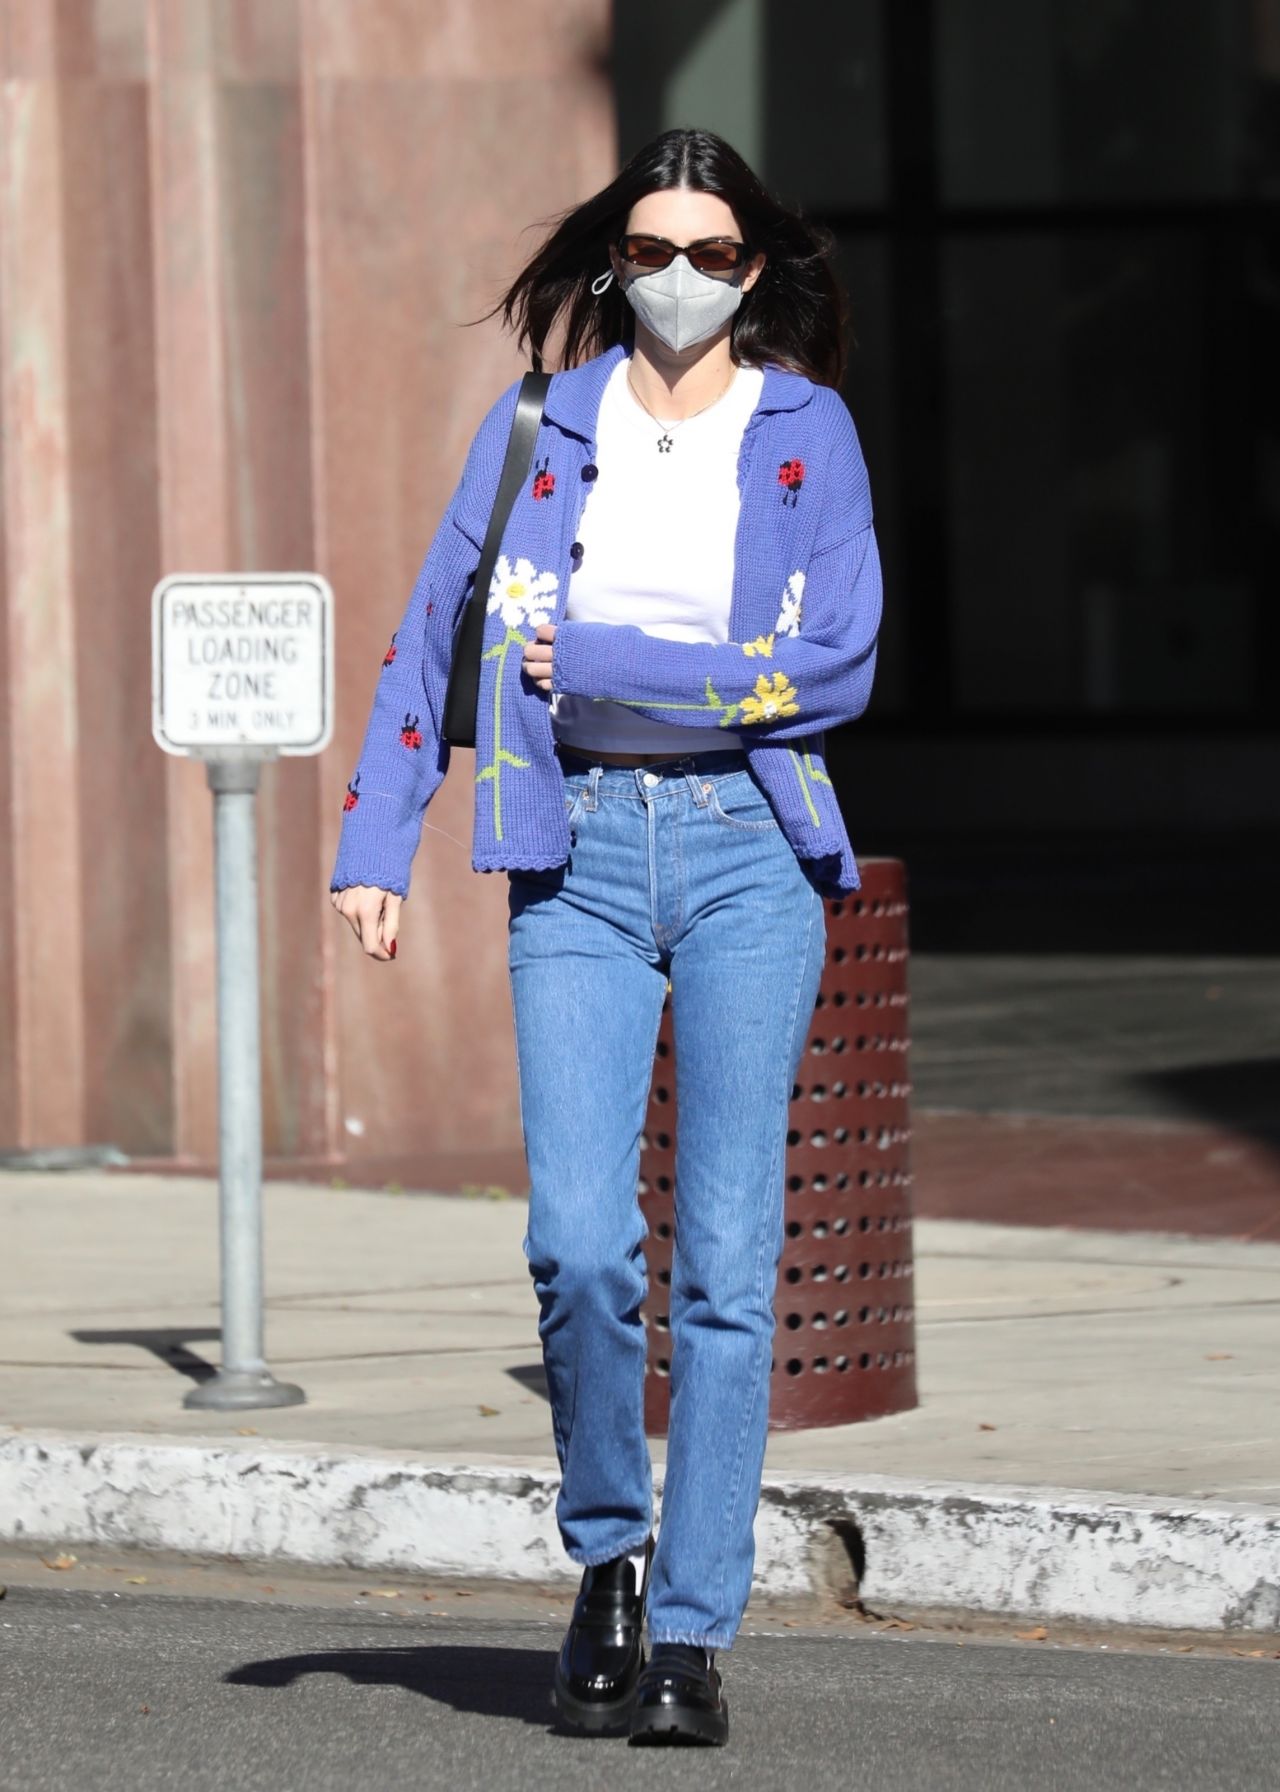 Kendall Jenner Los Angeles February 7, 2019 – Star Style